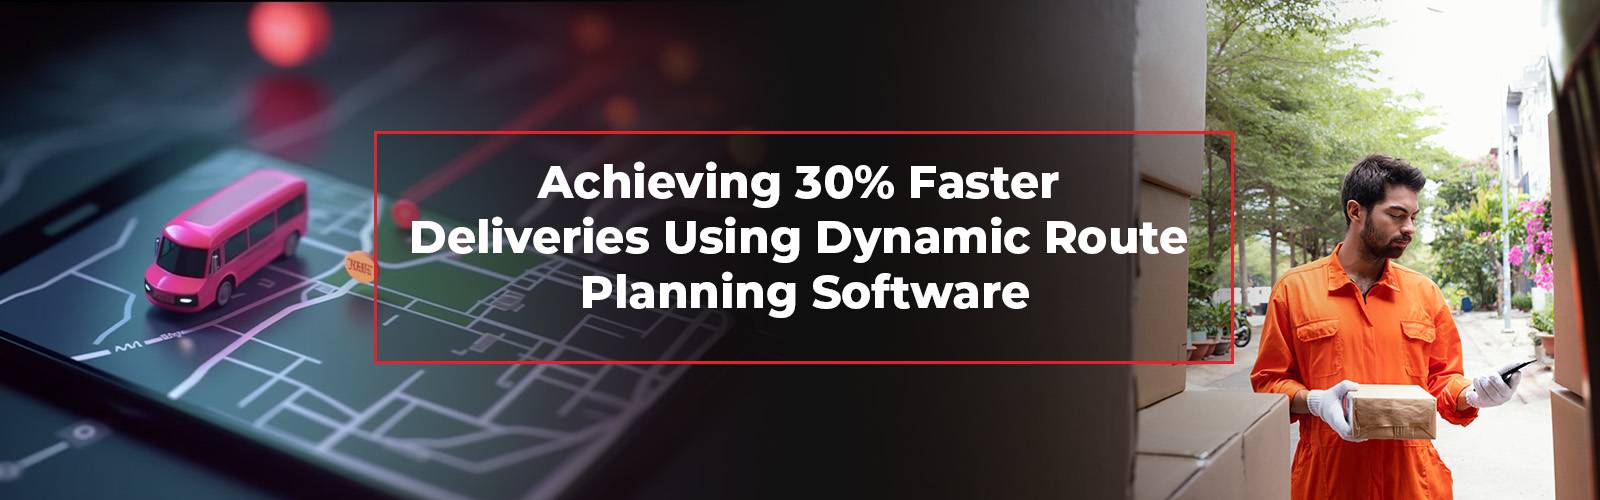 30% Faster Deliveries using Dynamic Route Planning Software